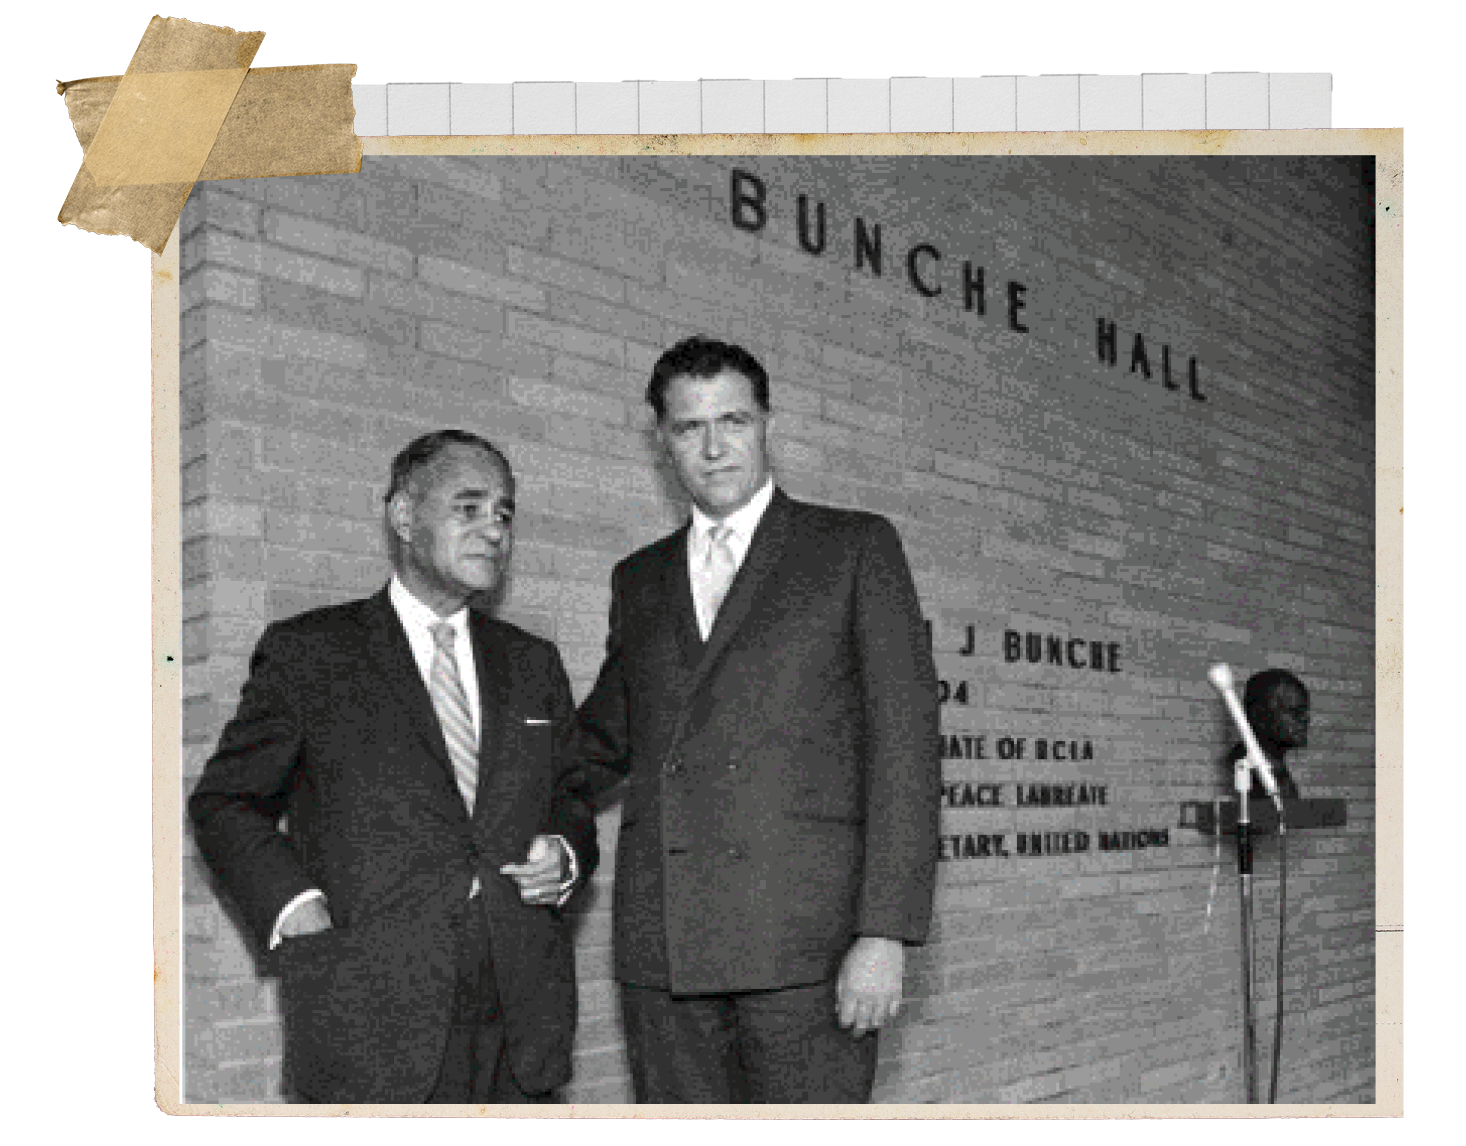 A black and white photography of Ralph Bunche with a man in a suit in front of "Bunche Hall," a building named in honor of him on 1969.